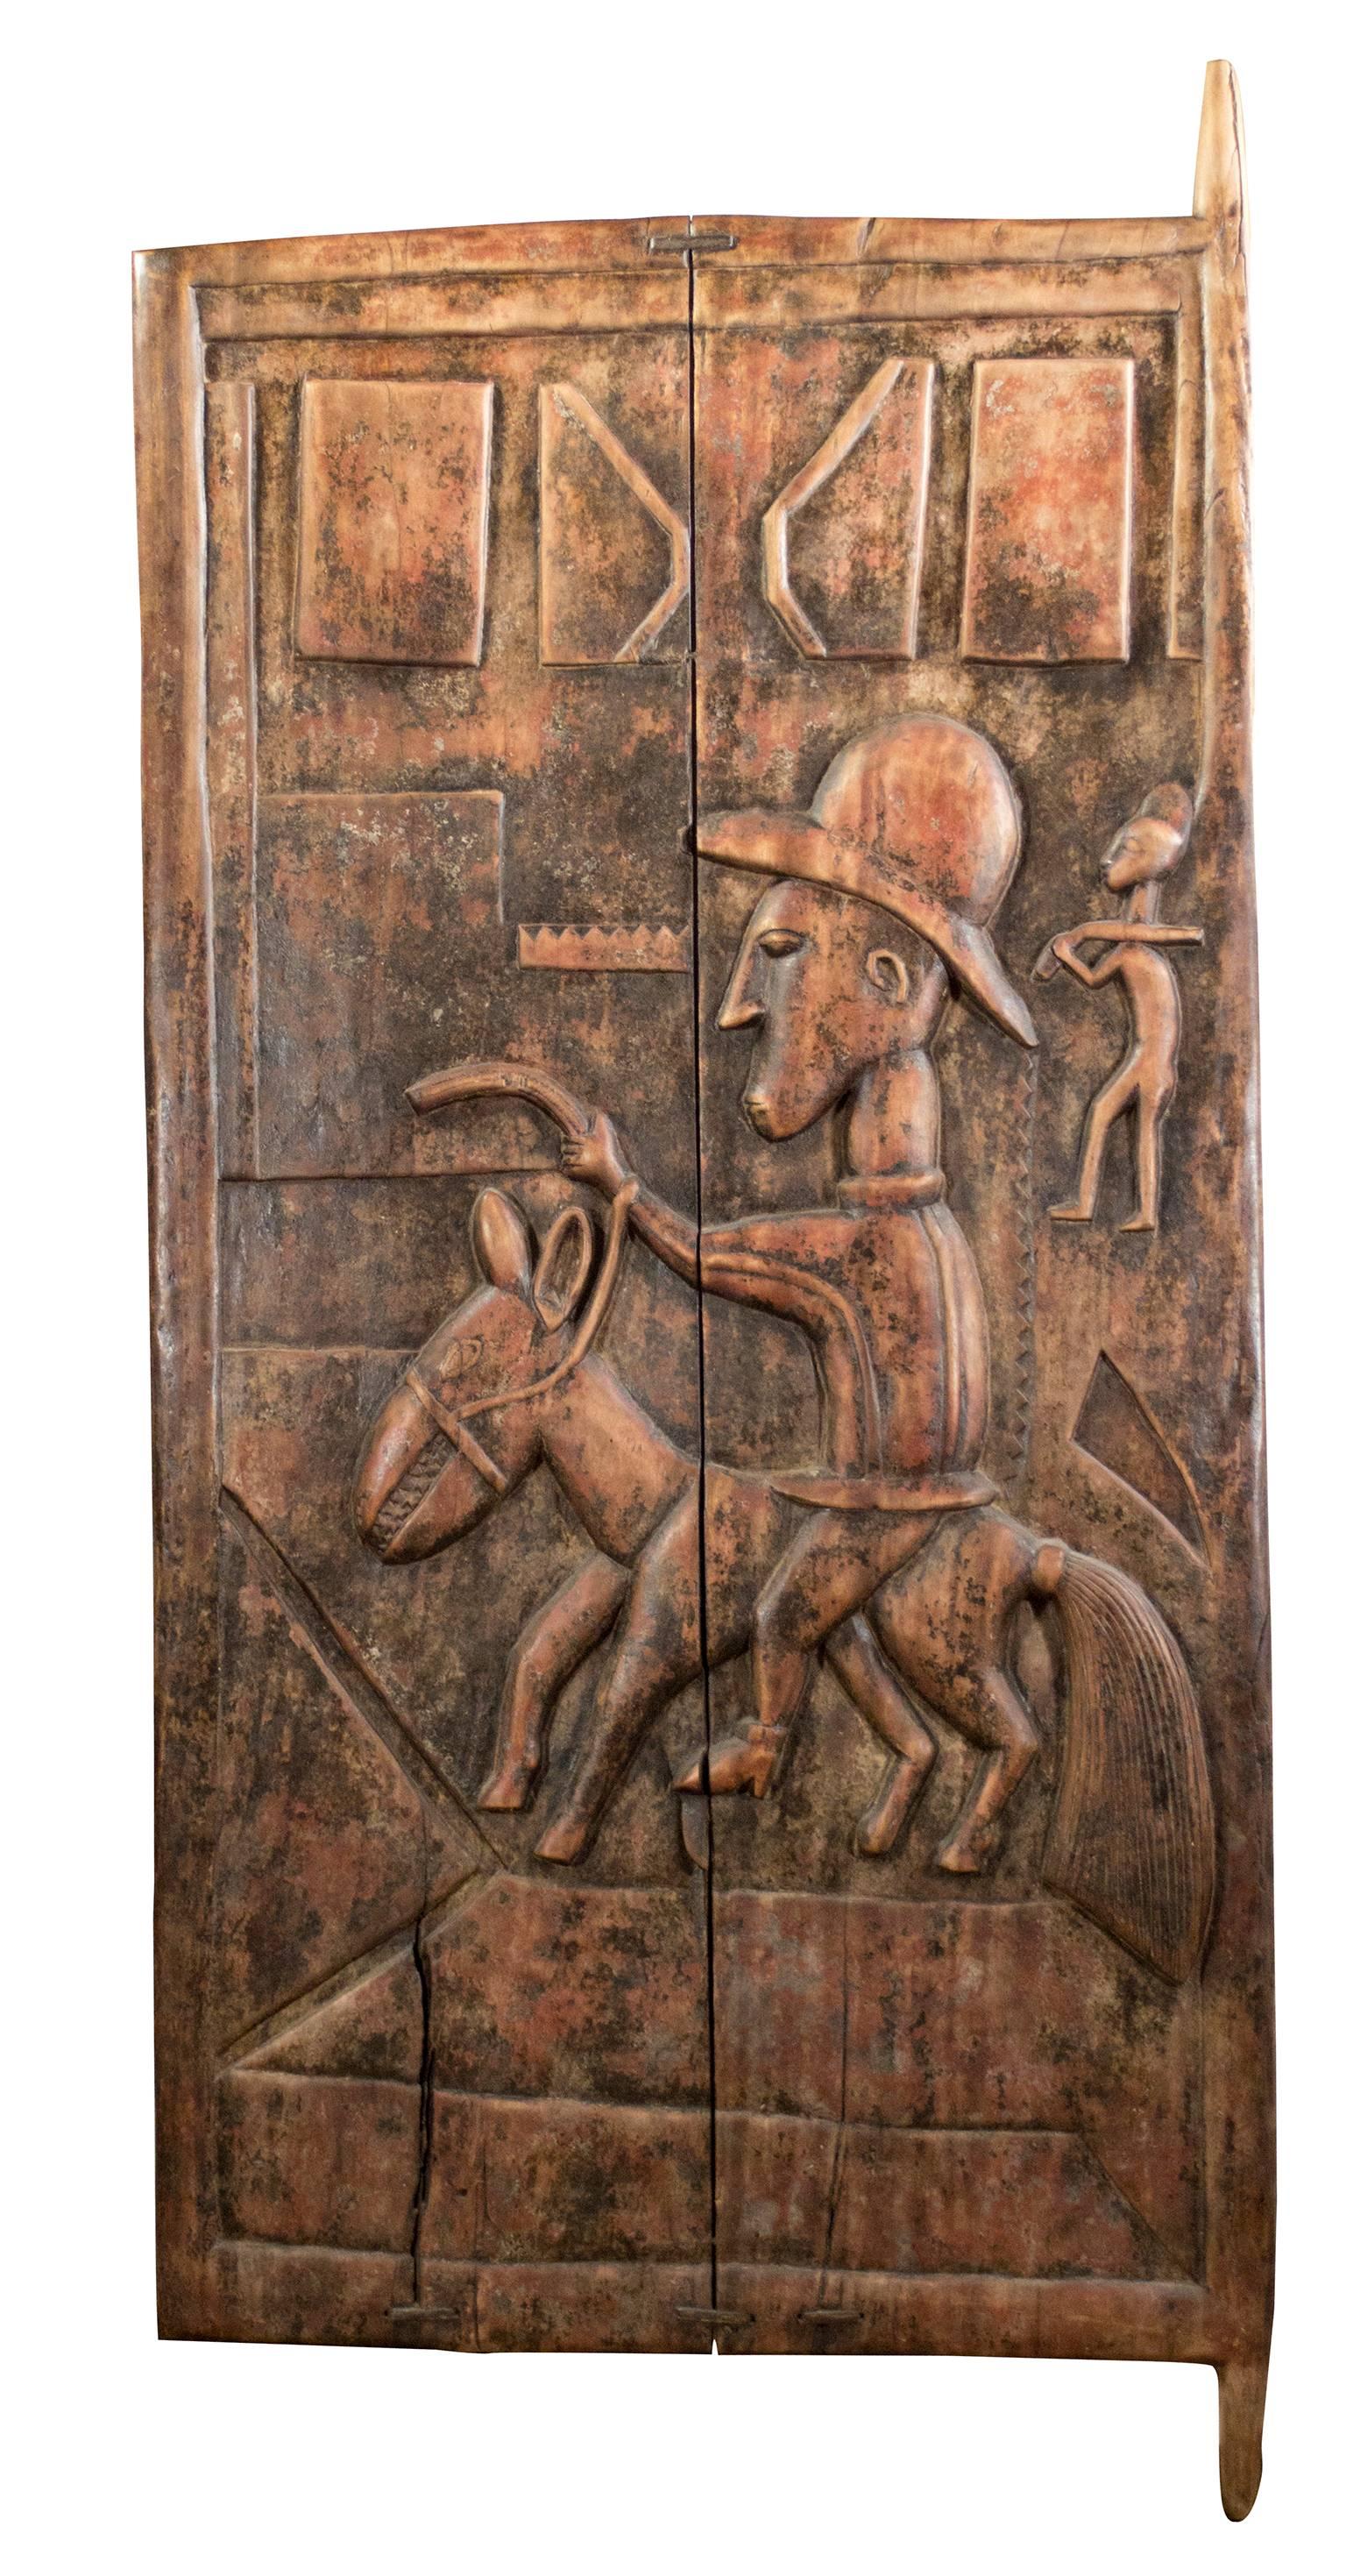 Unknown Figurative Sculpture - "African Baule Colonial Door, " Carved Wood created in 1930